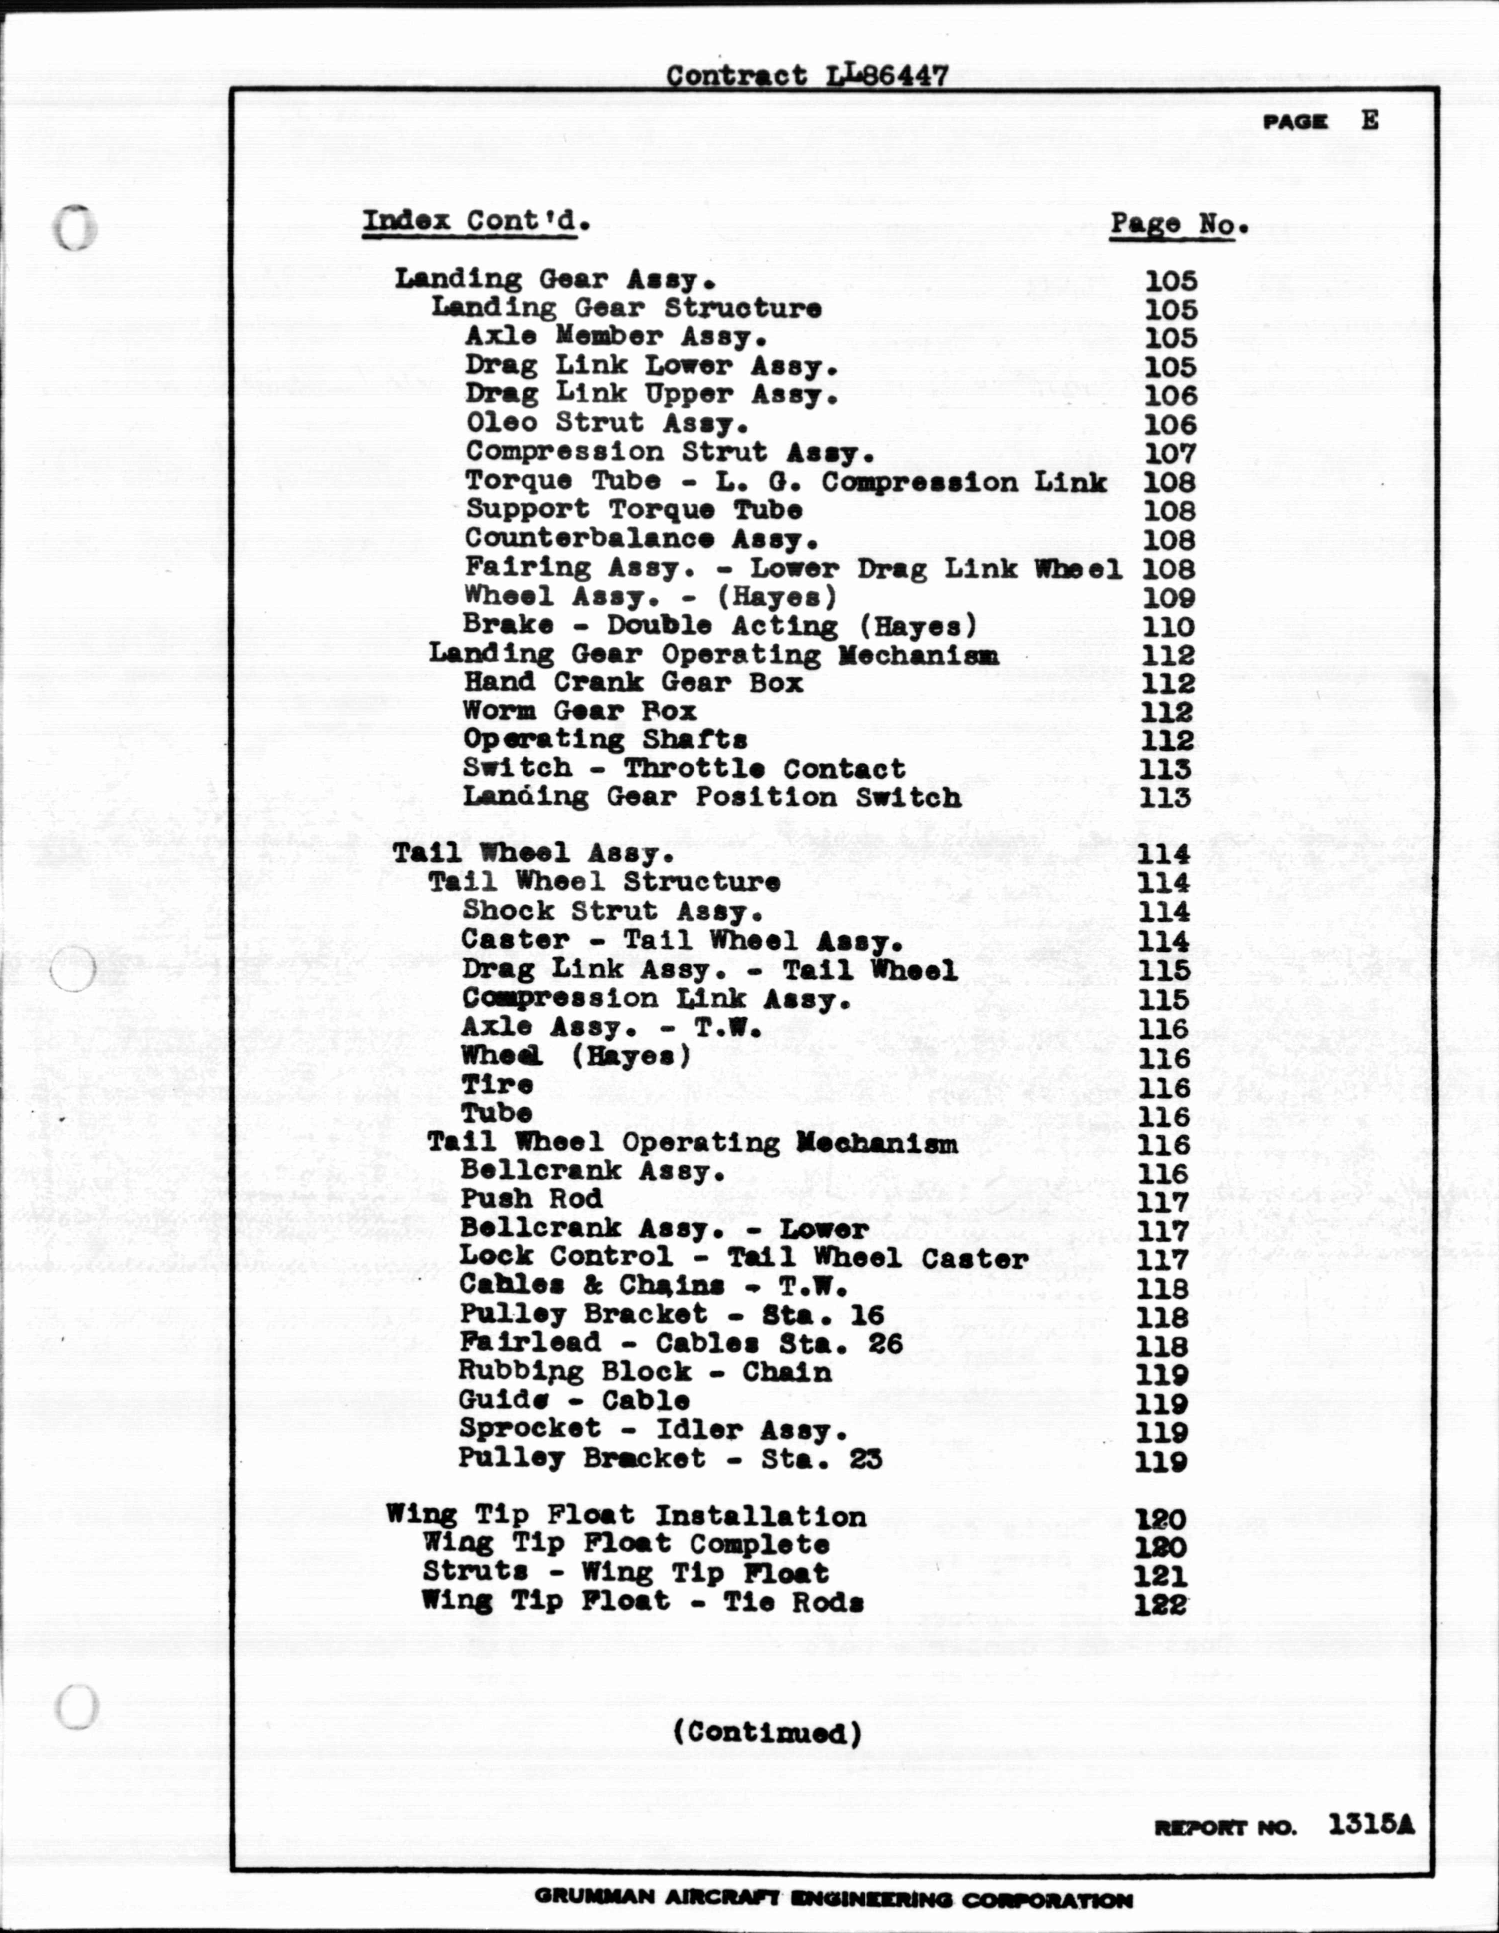 Sample page 5 from AirCorps Library document: JRF-6B Final Spare Parts List with Prices, Contract LL86-447 